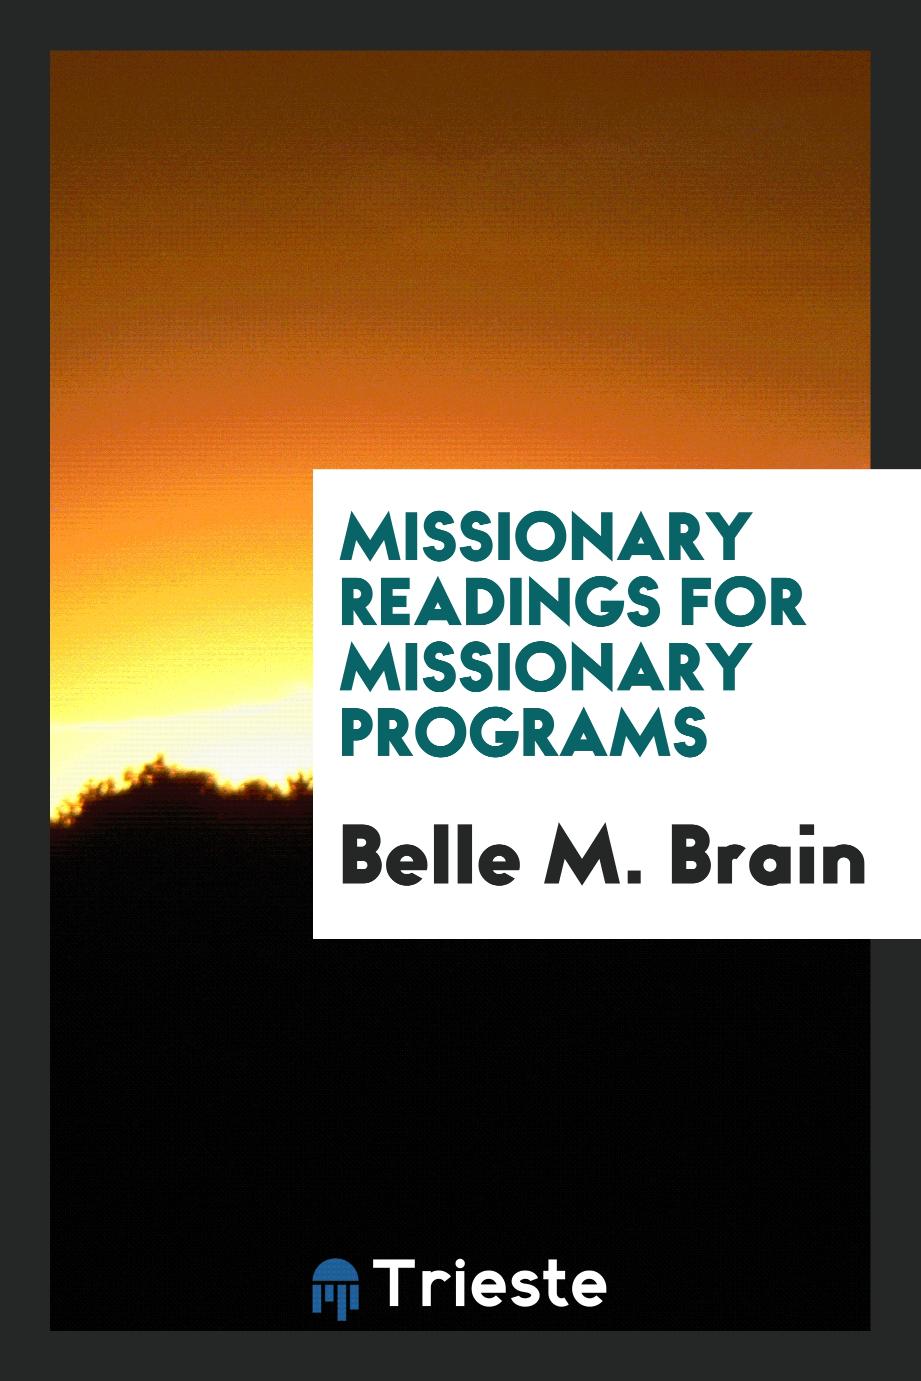 Missionary readings for missionary programs